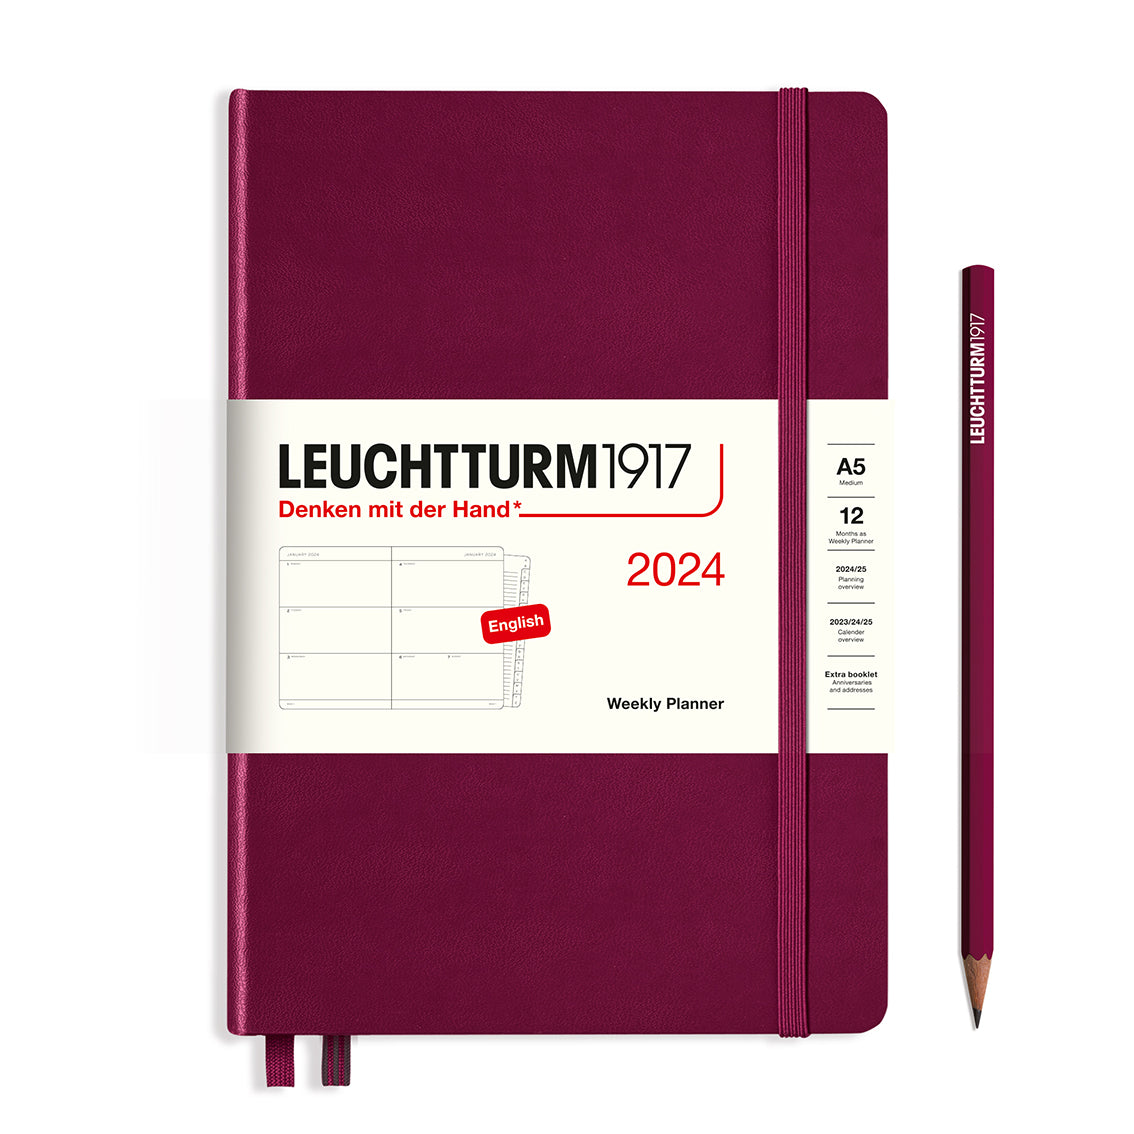 An image of a burgundy planner with a burgundy elastic band holding it together and a cream paper wrap around the middle stating the business name Leuchtturm1917, that it is for the year 2024, it is a weekly planner, is A5 in size and an English language version. It has an image on the wrap showing the inside layout which is a week spread across 2 pages. A burgundy pencil is shown at the side of the planner.